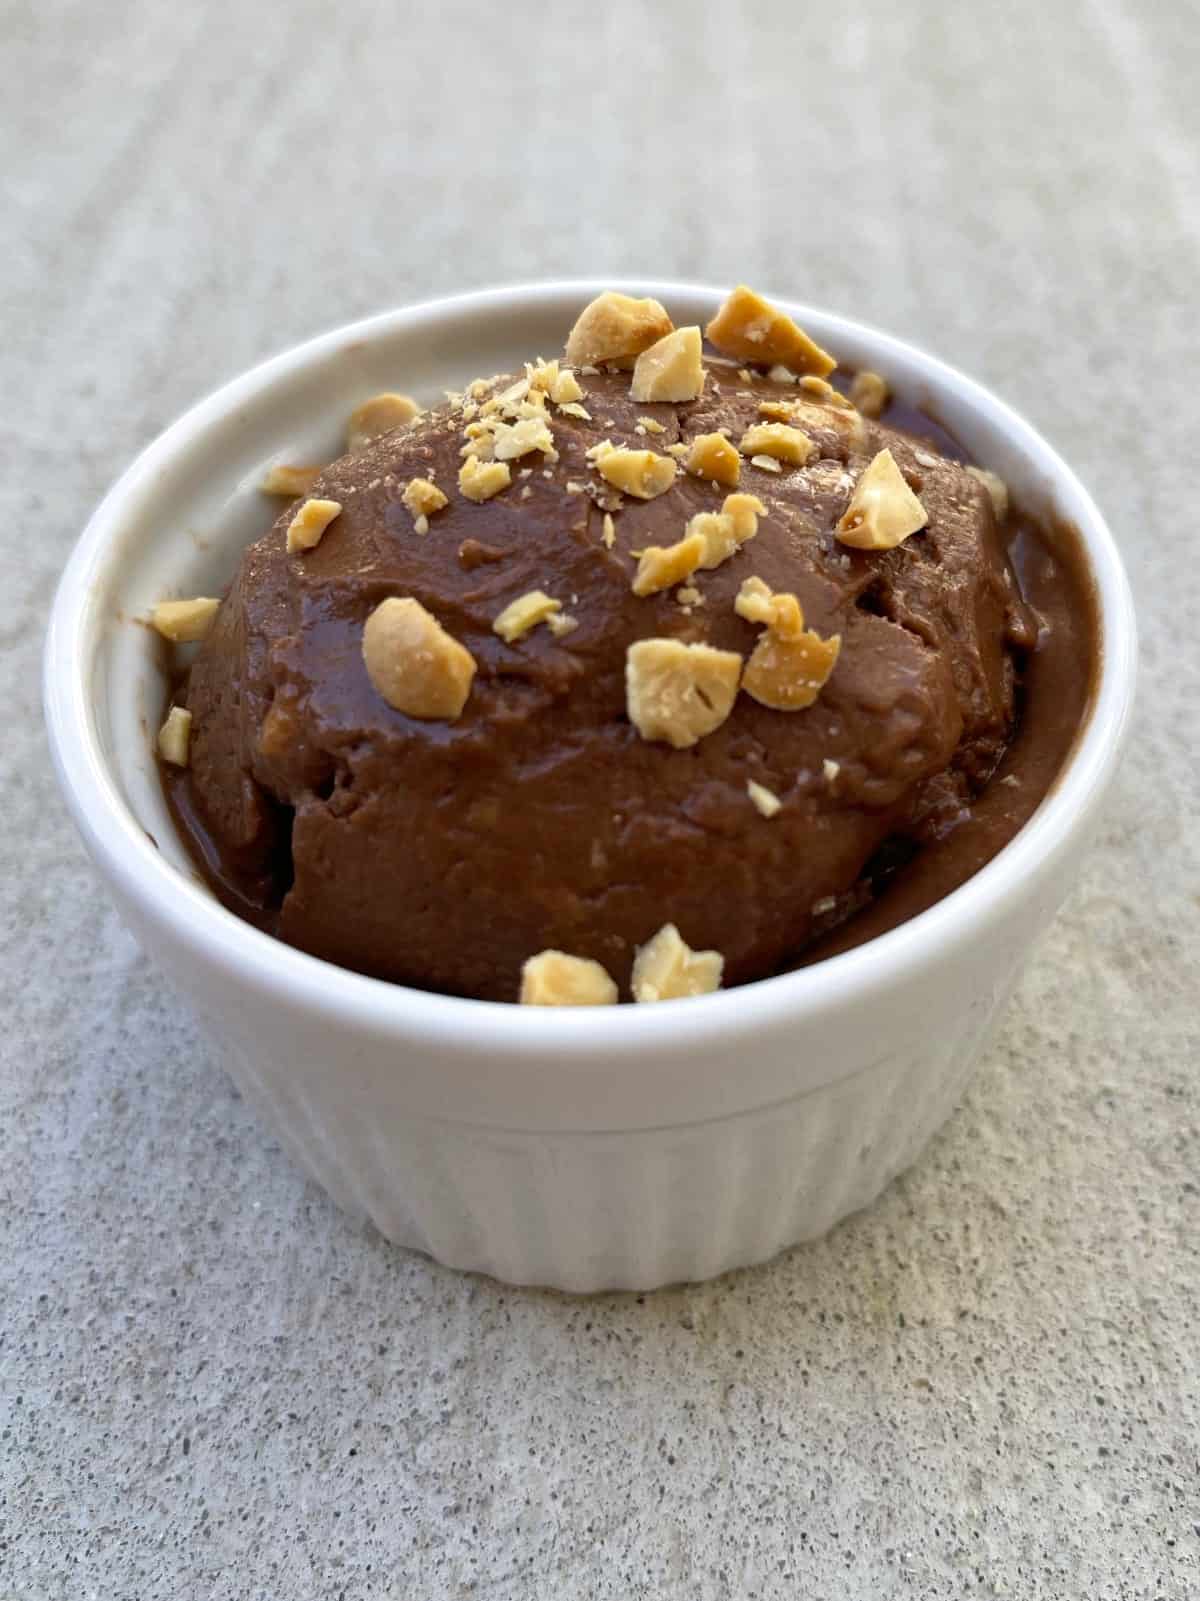 Peanut butter chocolate nice cream topped with chopped salted peanuts.